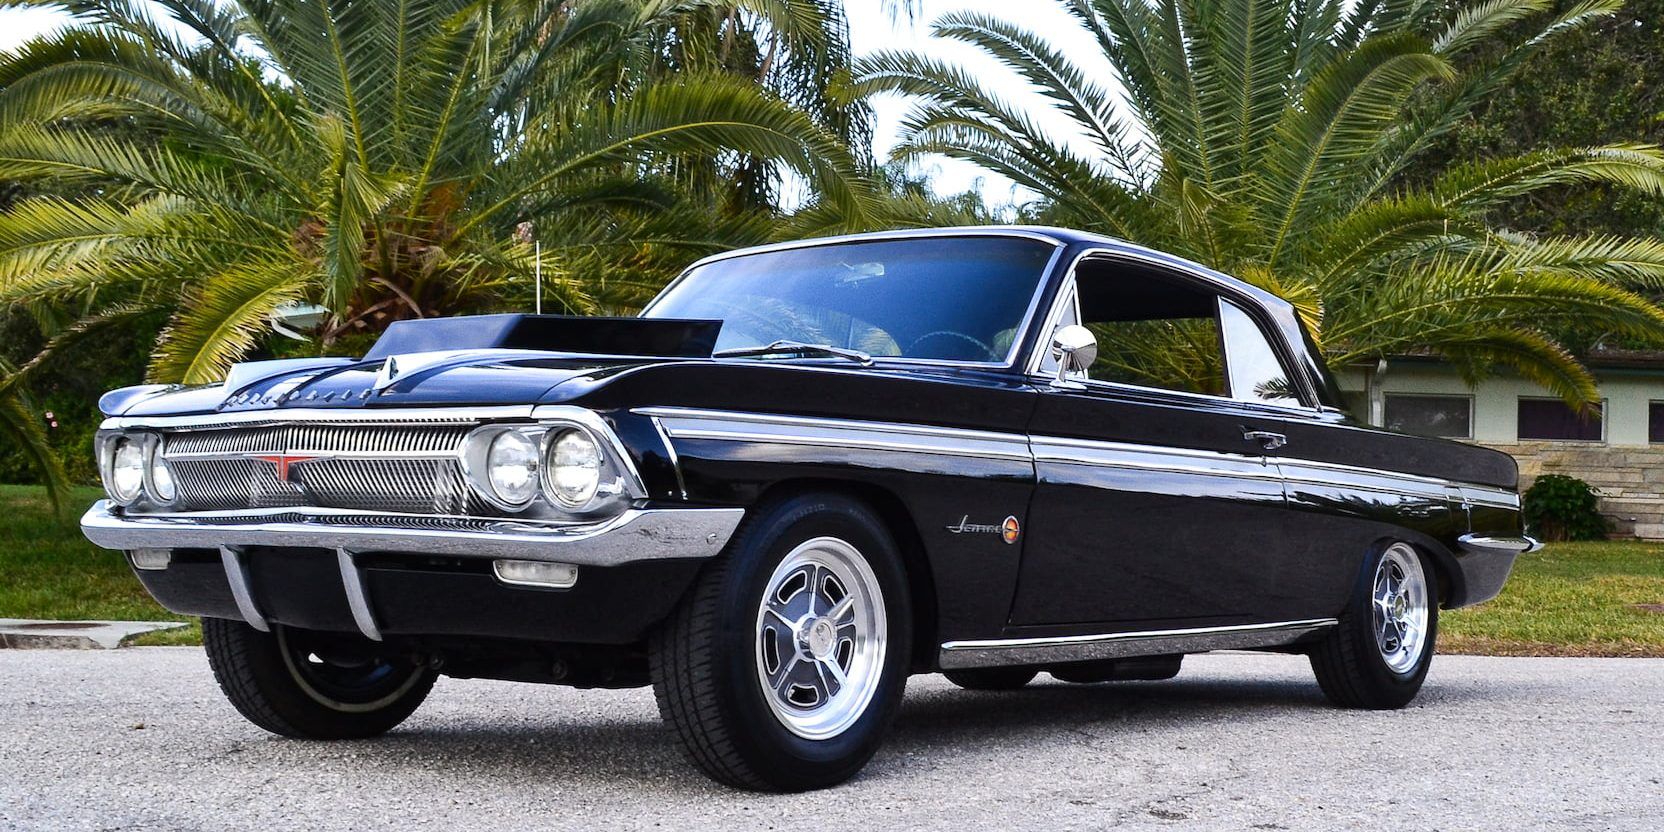 10 Classic American Cars That Were Ahead Of Their Time